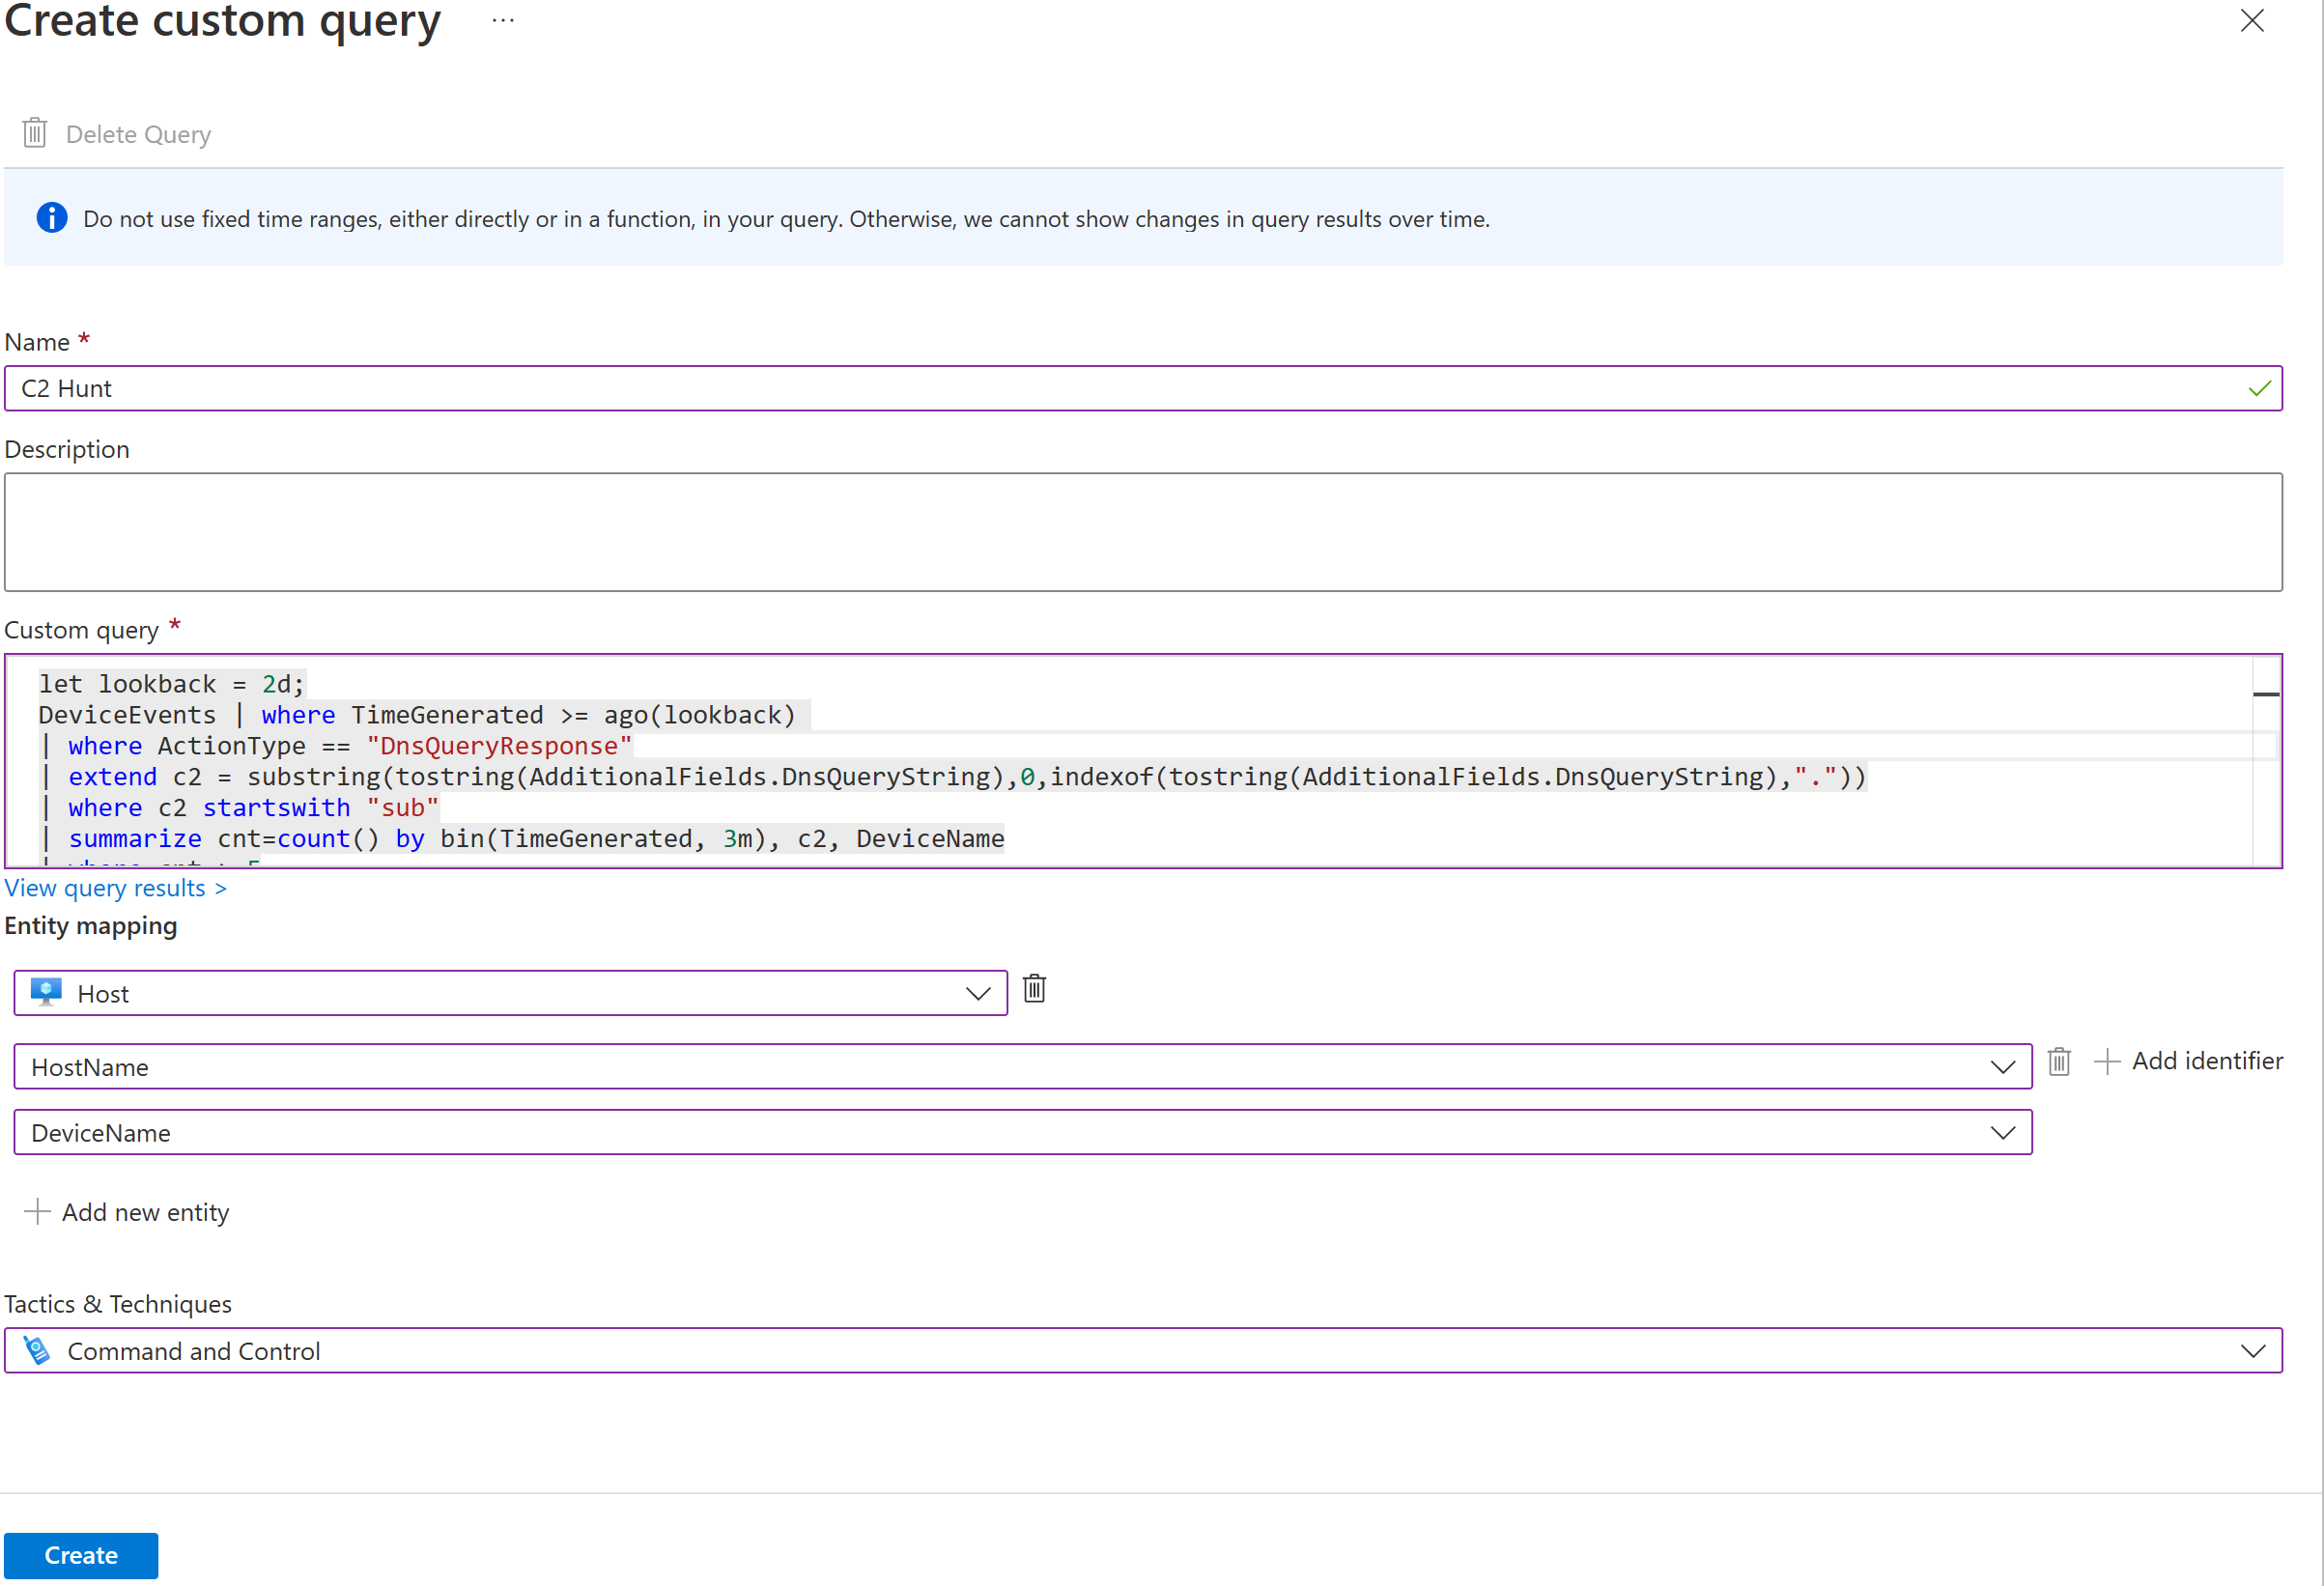 The page for creating a custom query in Microsoft Sentinel.